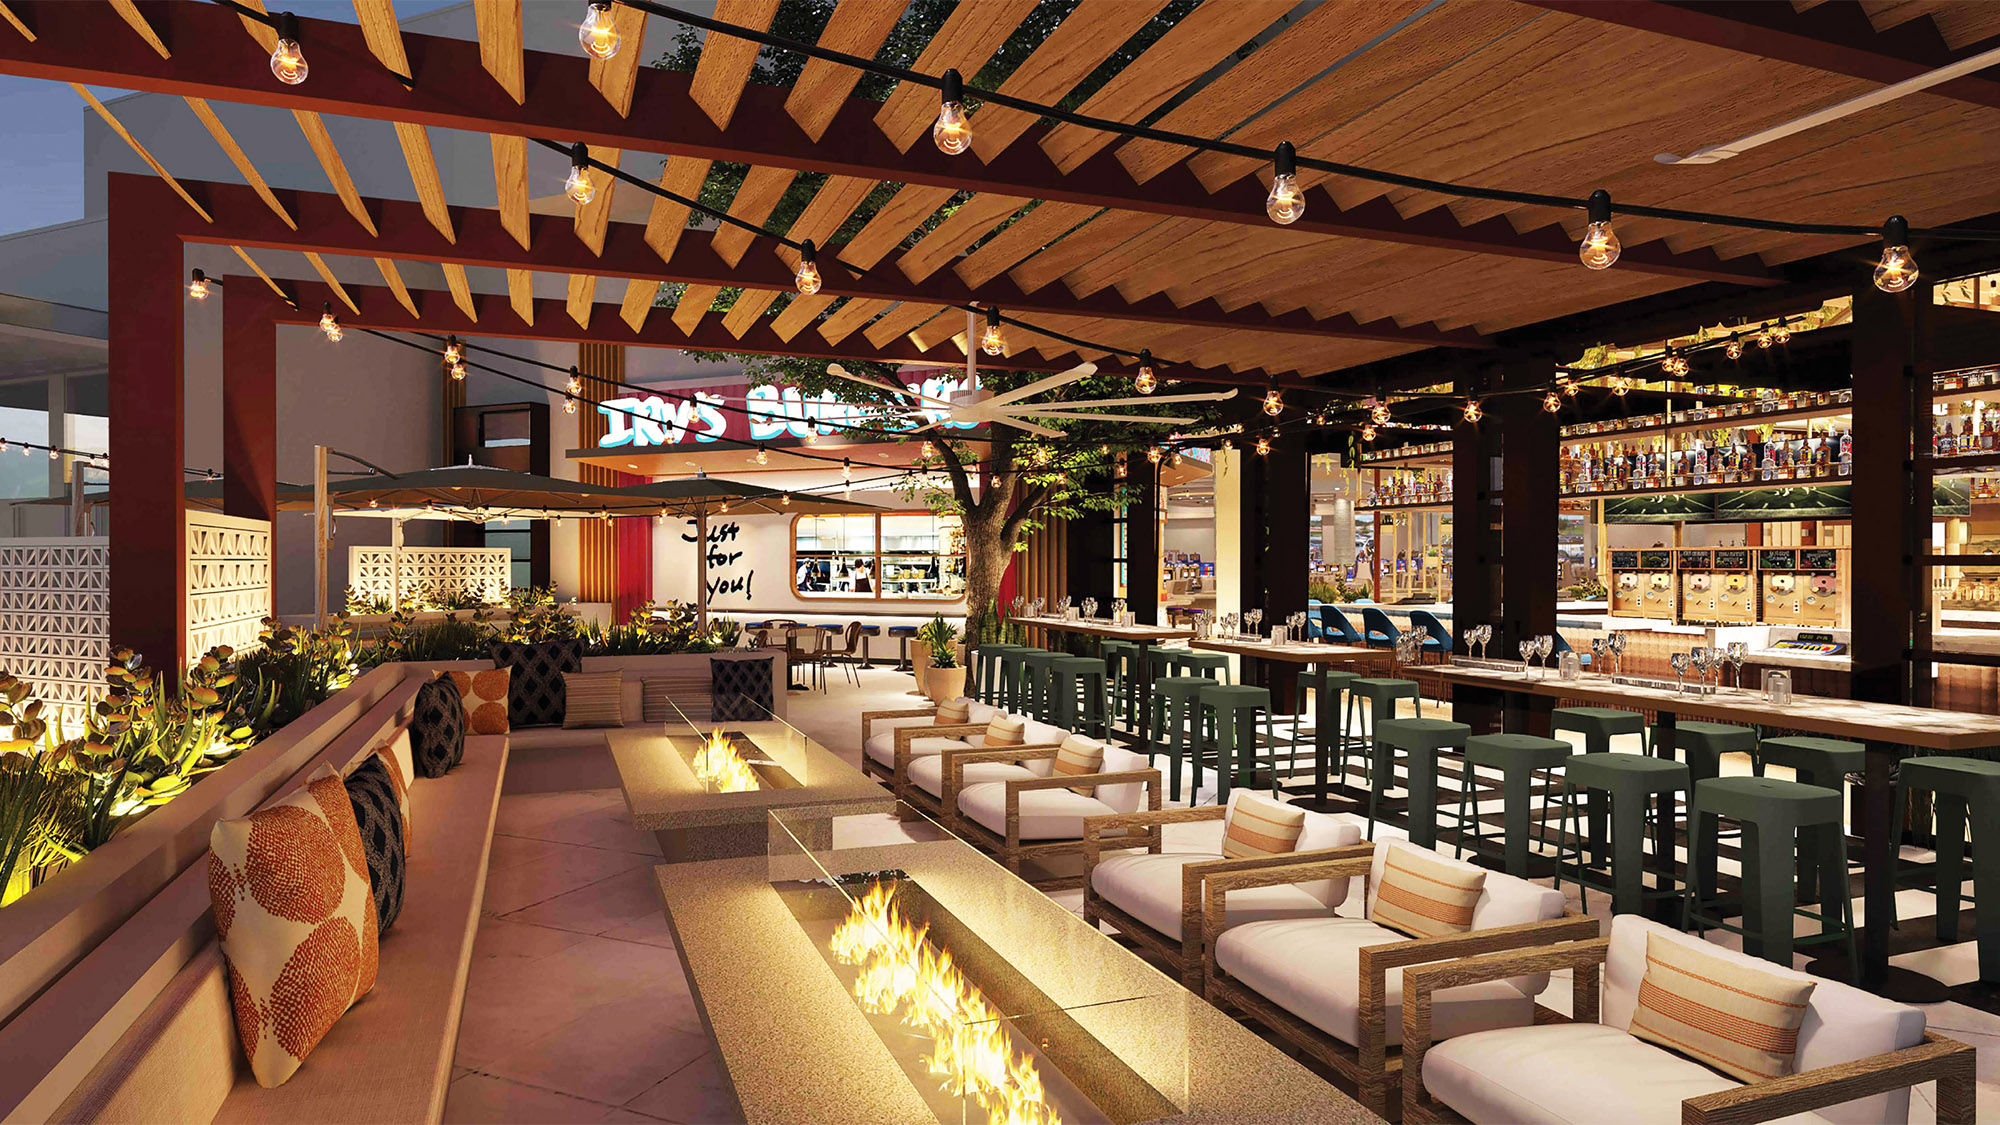 Los Angeles staple Irv's Burgers will be among the offerings at the Durango Casino & Resort's Eat Your Heart Out Food Hall.